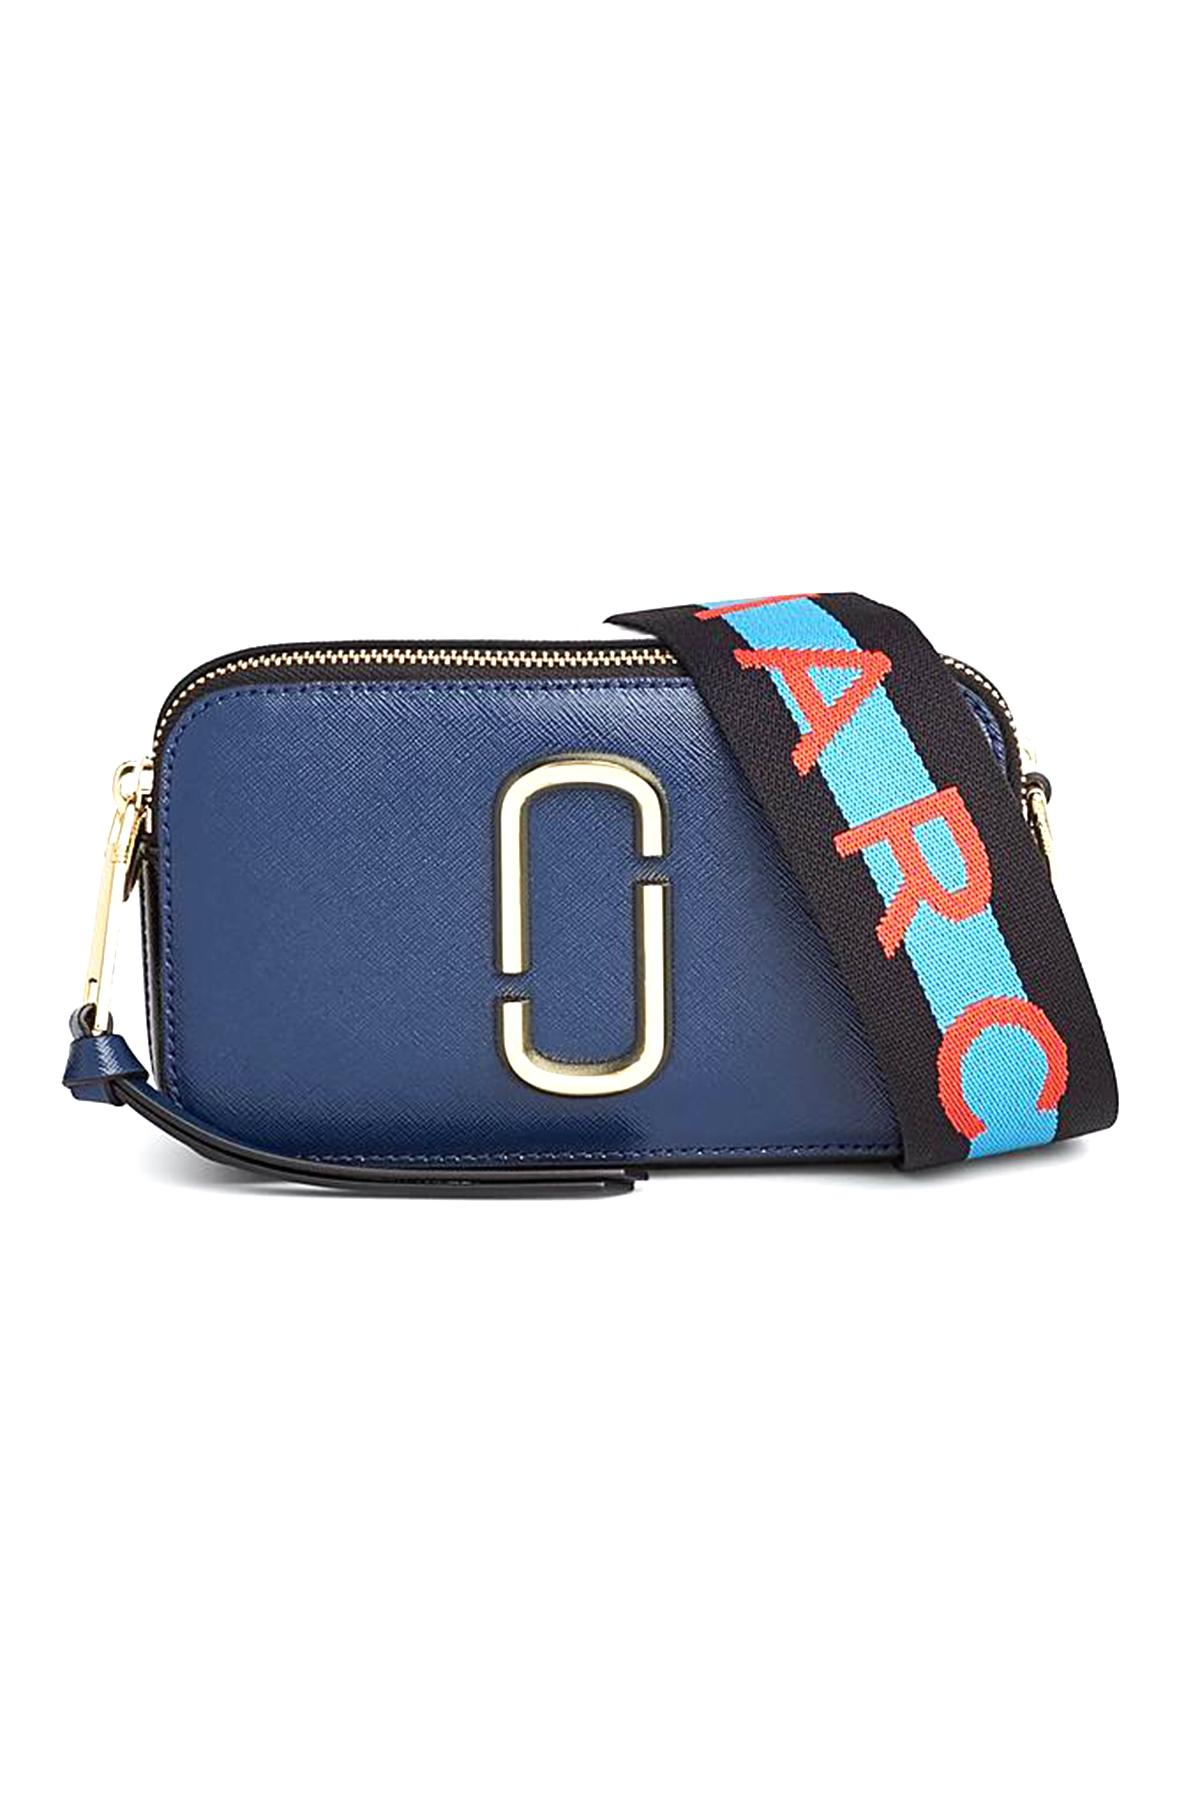 Marc Jacobs, Bags, Brand New Marc Jacobs Snapshot Bag With Tags New Blue  Sea Multi Colored